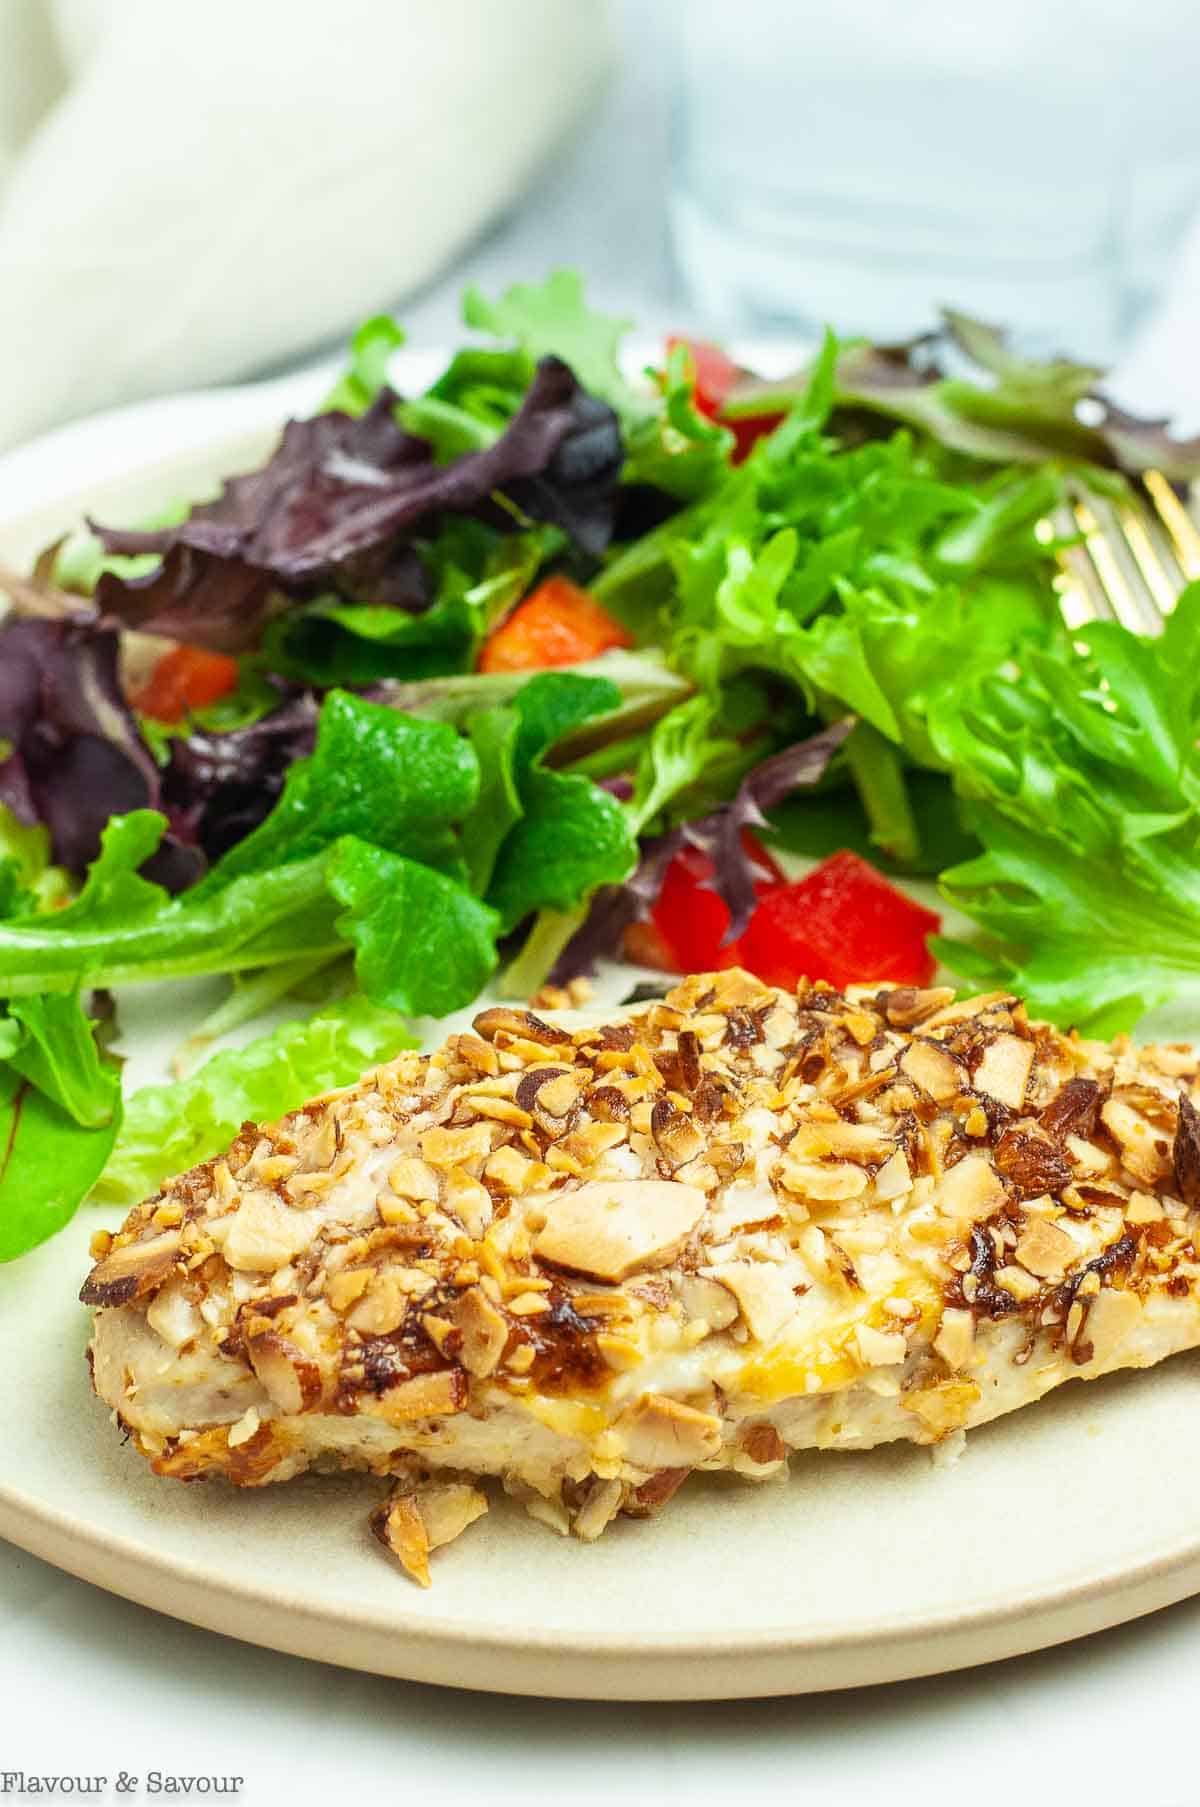 An almond-crusted chicken breast on a plate with a green salad.